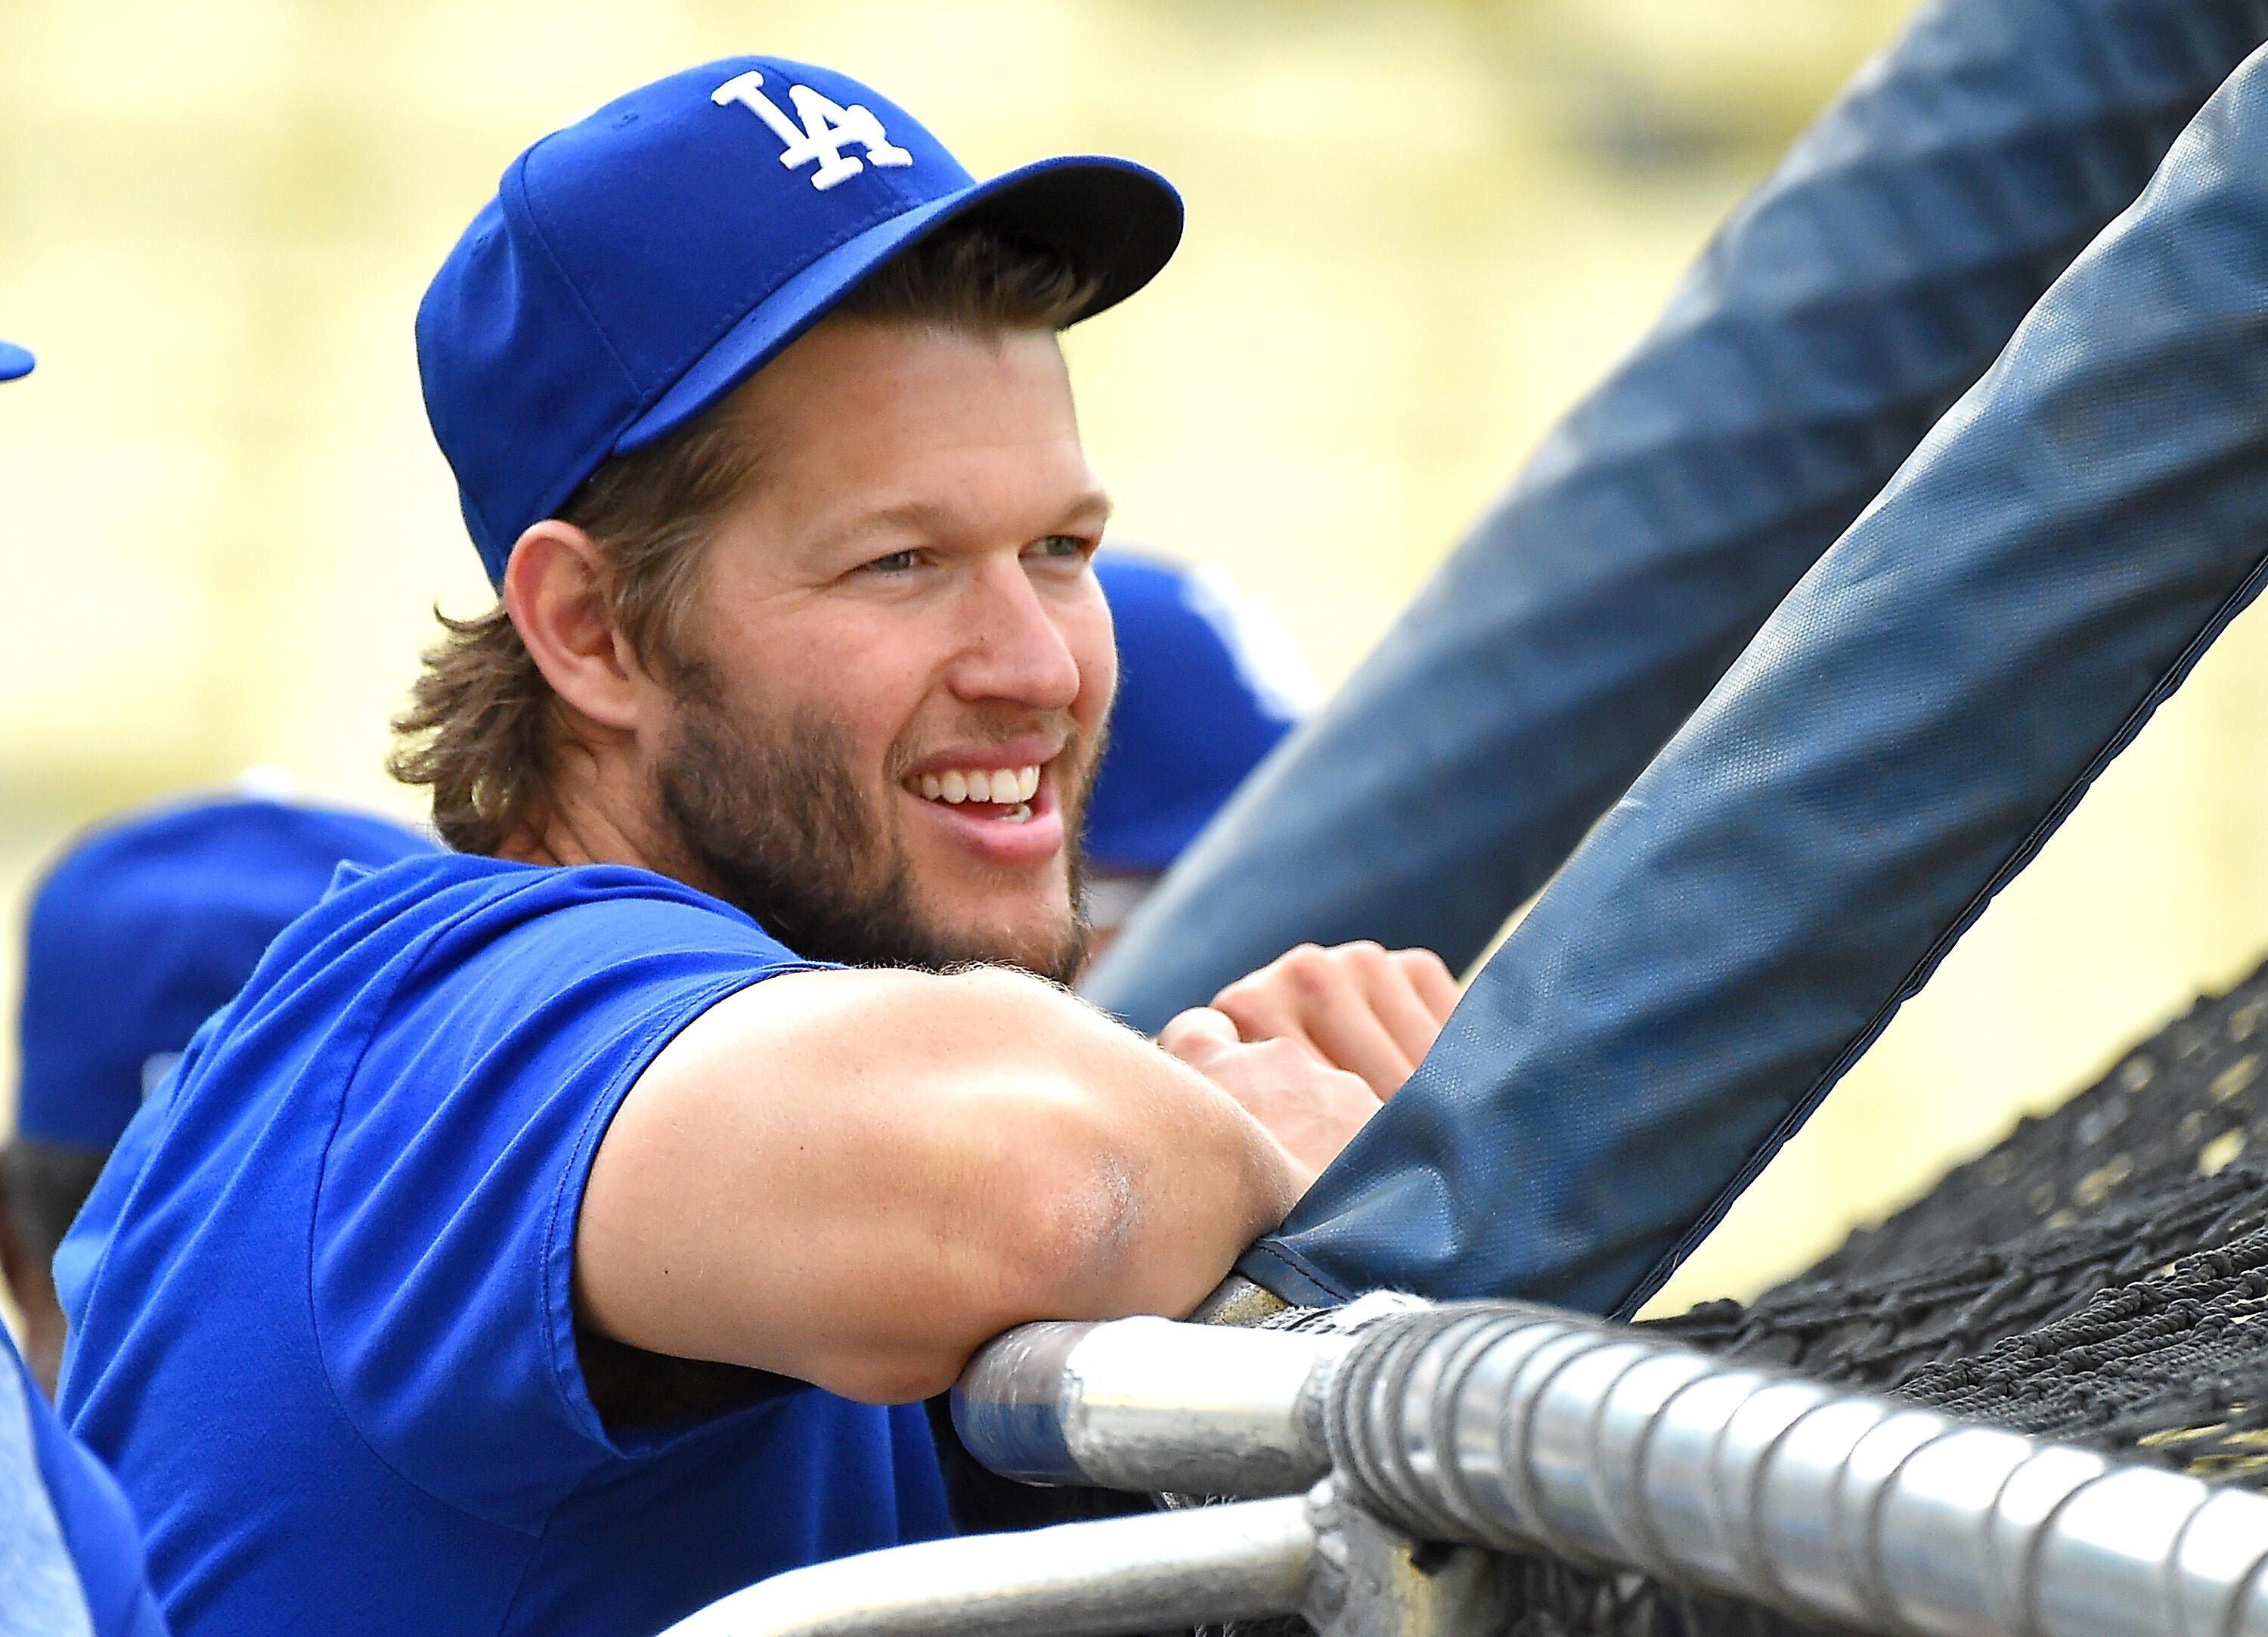 LOS ANGELES, CA - APRIL 18: Clayton Kershaw #22 of the Los Angeles Dodgers watches batting practice before the game against the against the Colorado Rockies at Dodger Stadium on April 18, 2017 in Los Angeles, California. (Photo by Jayne Kamin-Oncea/Getty 